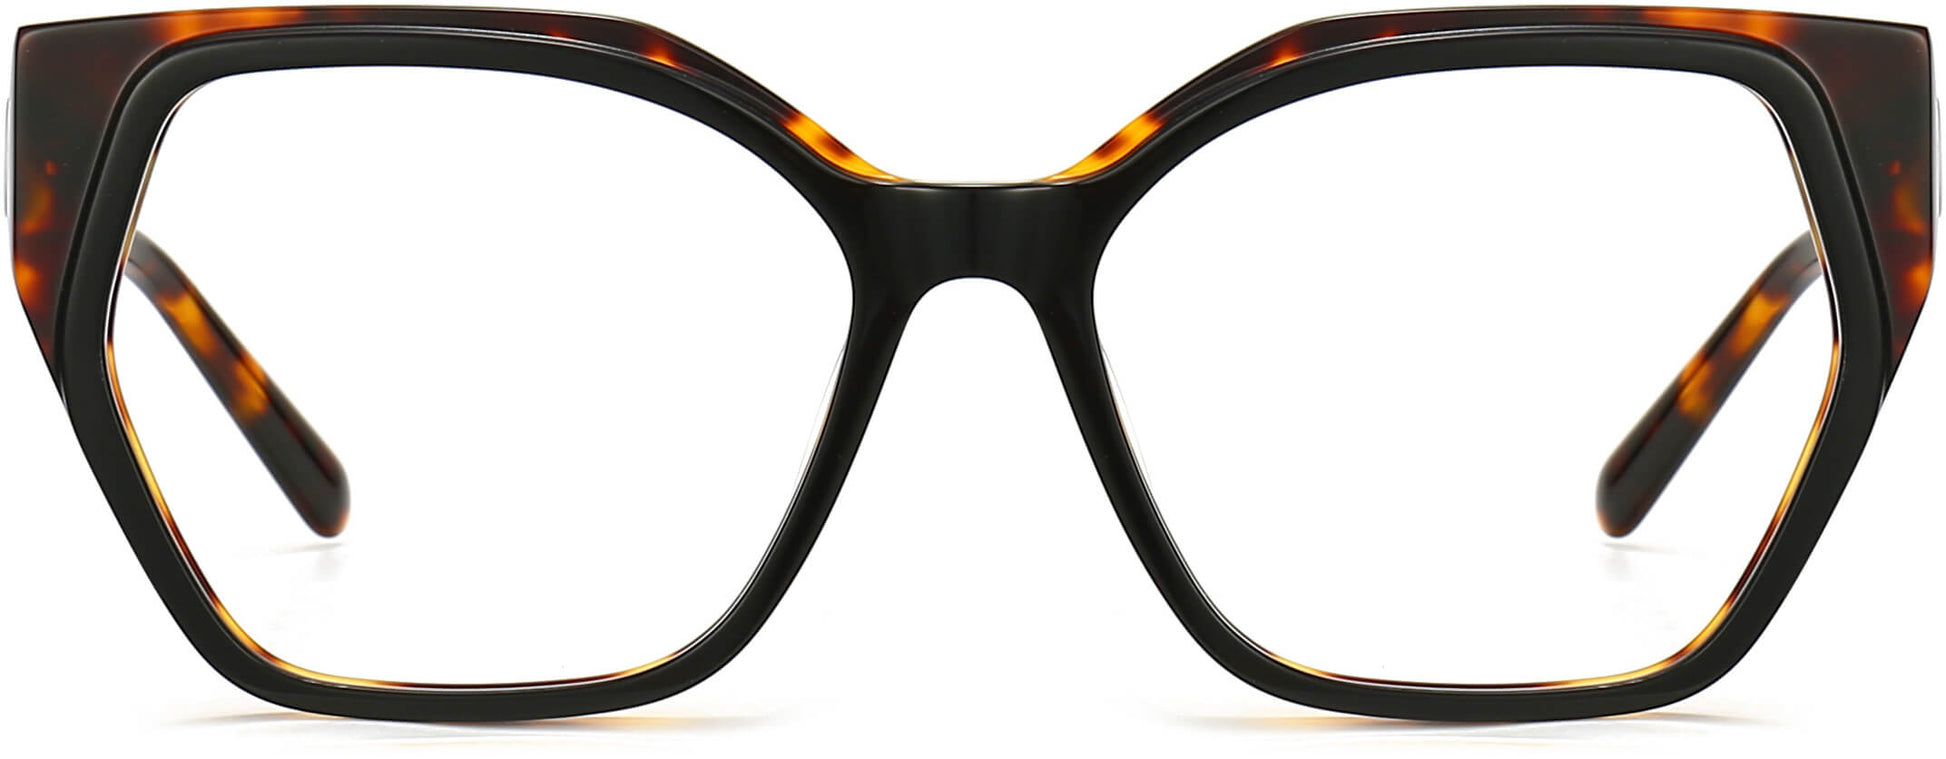 Rosalee Cateye Tortoise Eyeglasses from ANRRI, front view